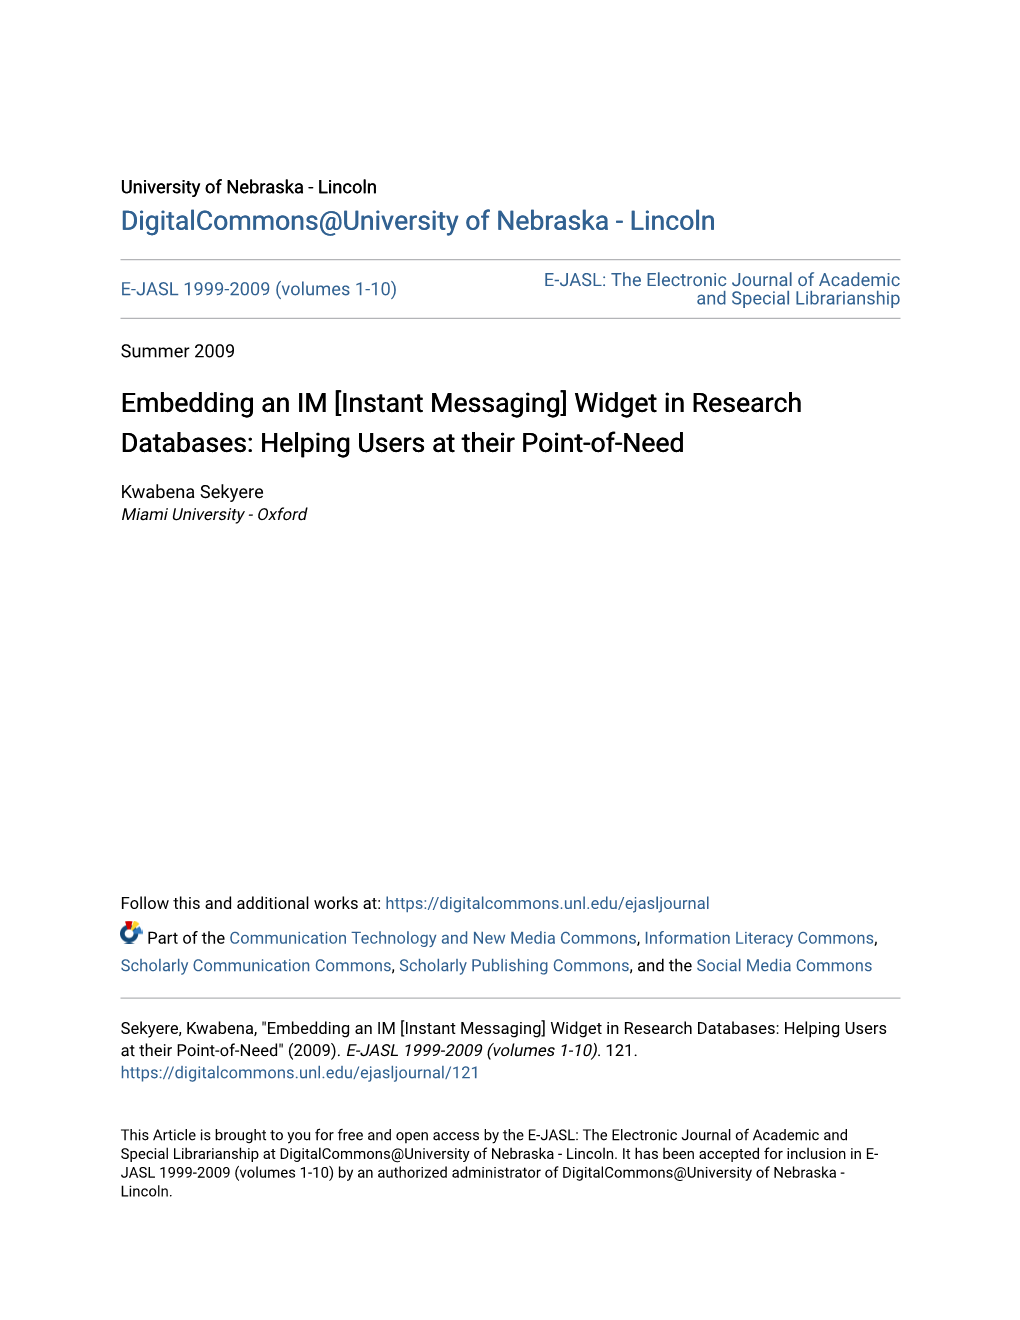 Instant Messaging] Widget in Research Databases: Helping Users at Their Point-Of-Need